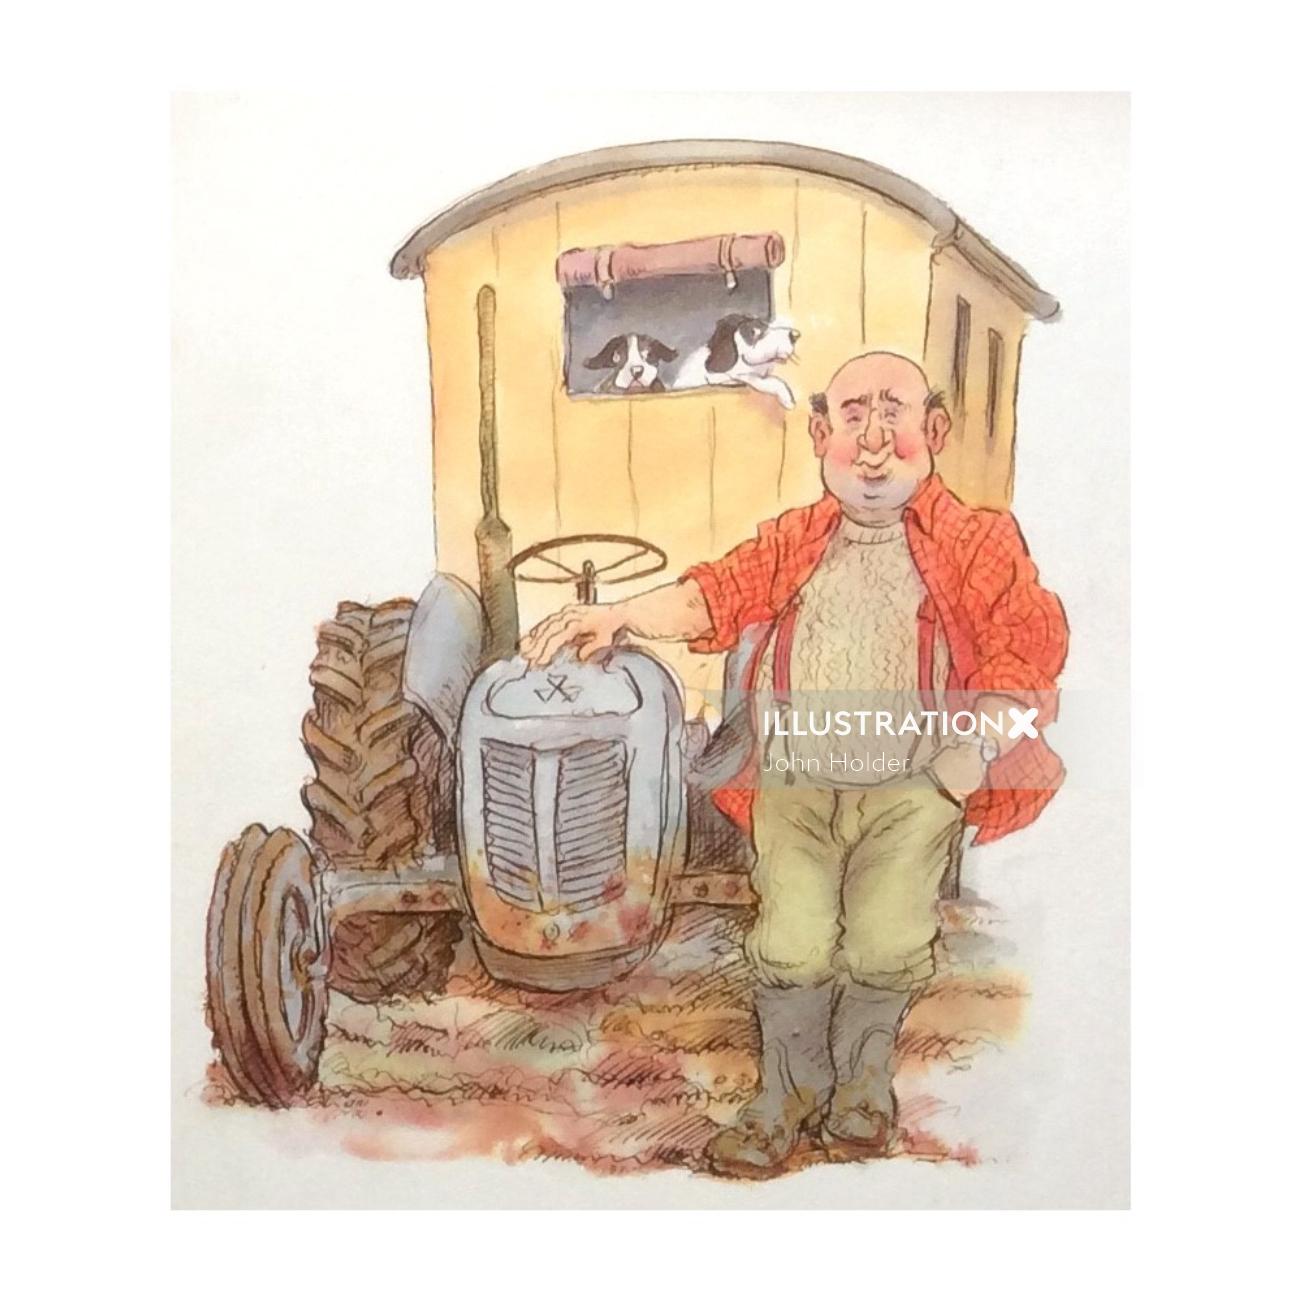 Cartoon & Humour man with tractor